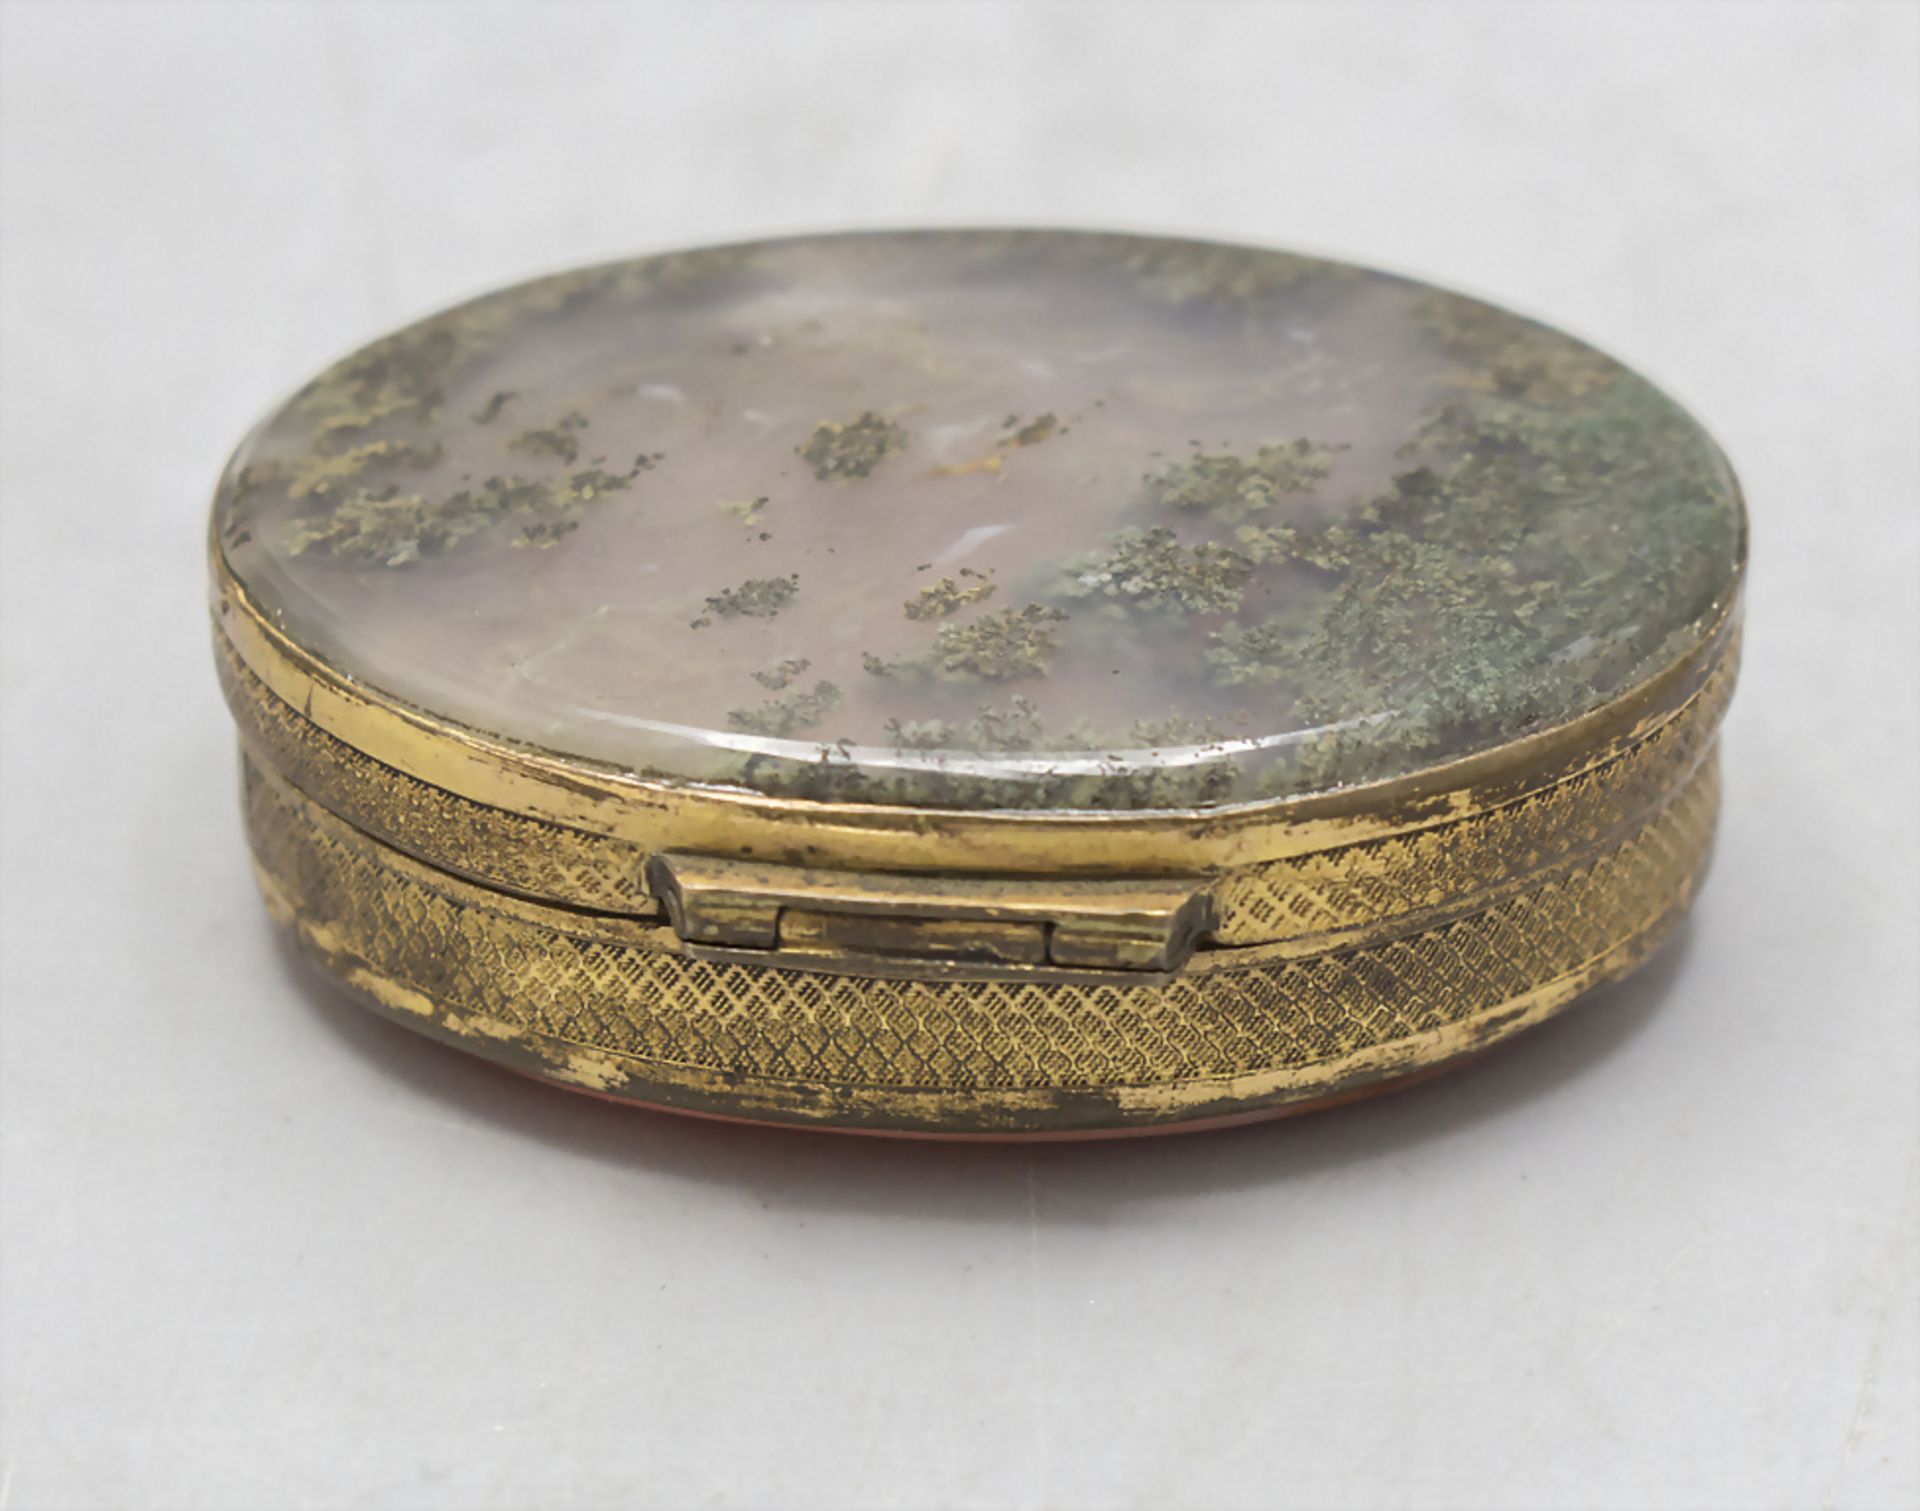 Ovale Achat Deckeldose / Tabatiere / An oval agate snuffbox, Frankreich, Ende 19. Jh. - Image 3 of 5